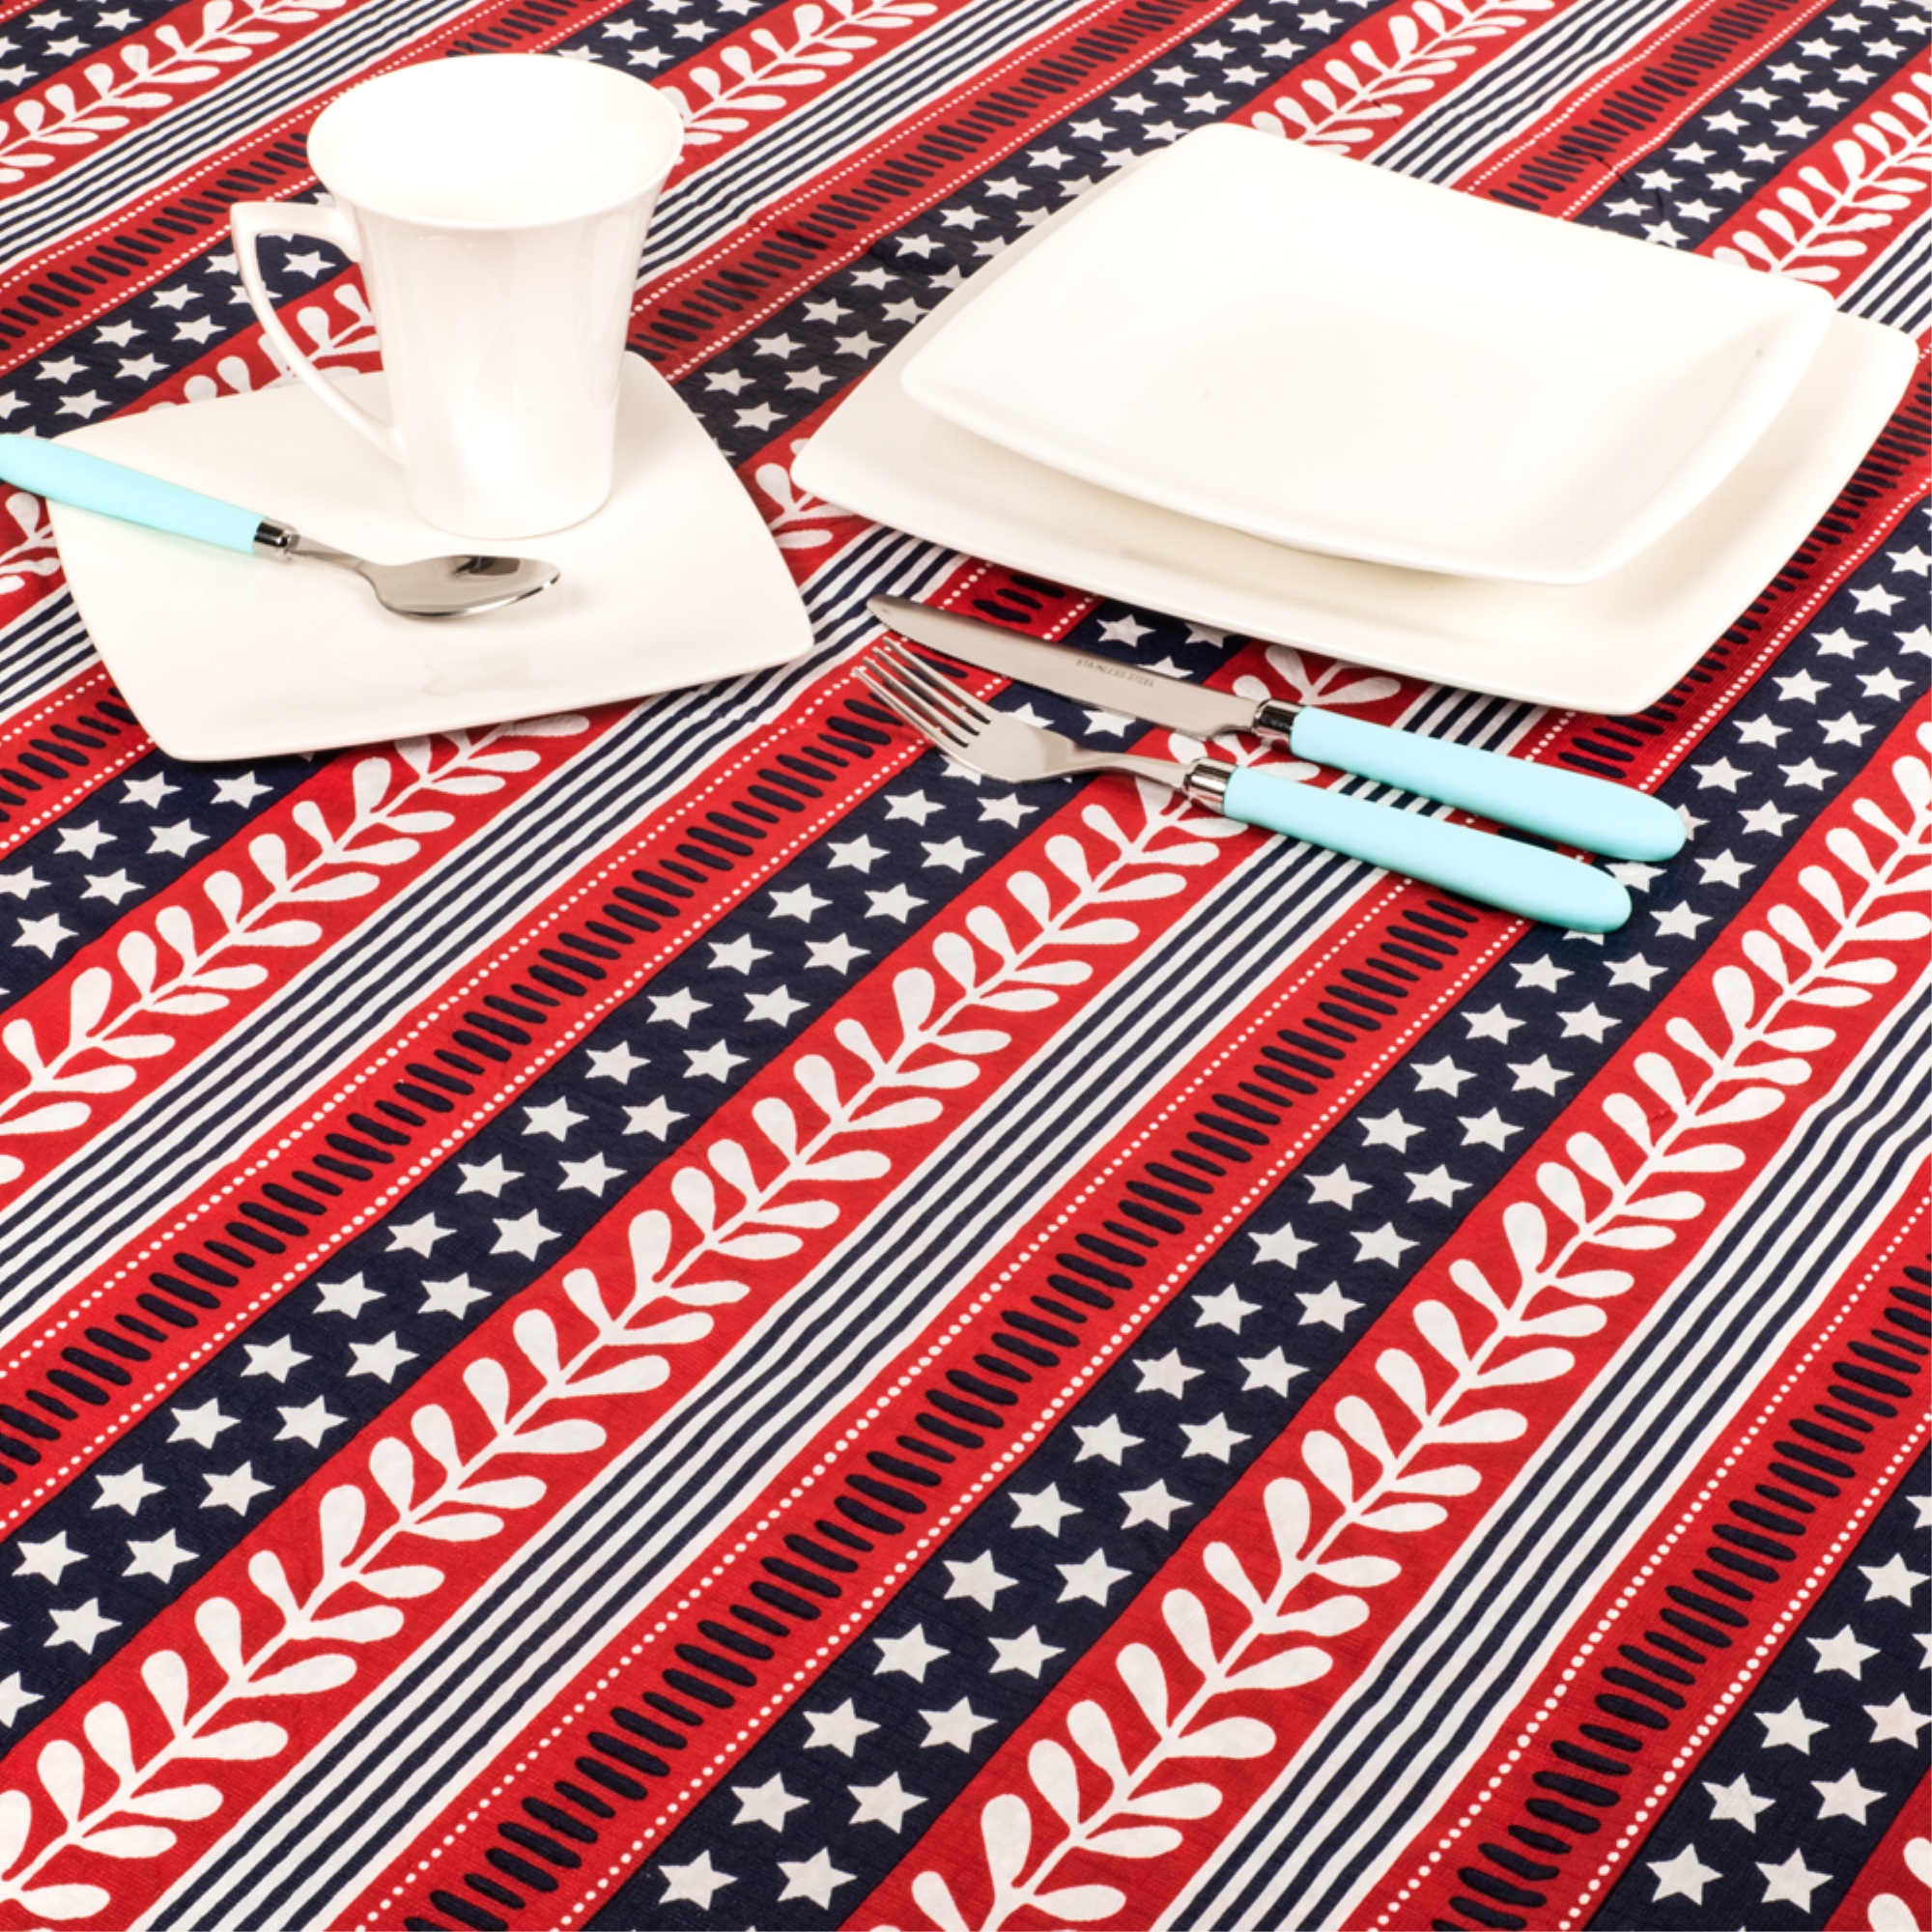 Carnation Home Fashions "Americana" 52"x52" vinyl flannel backed tablecloth